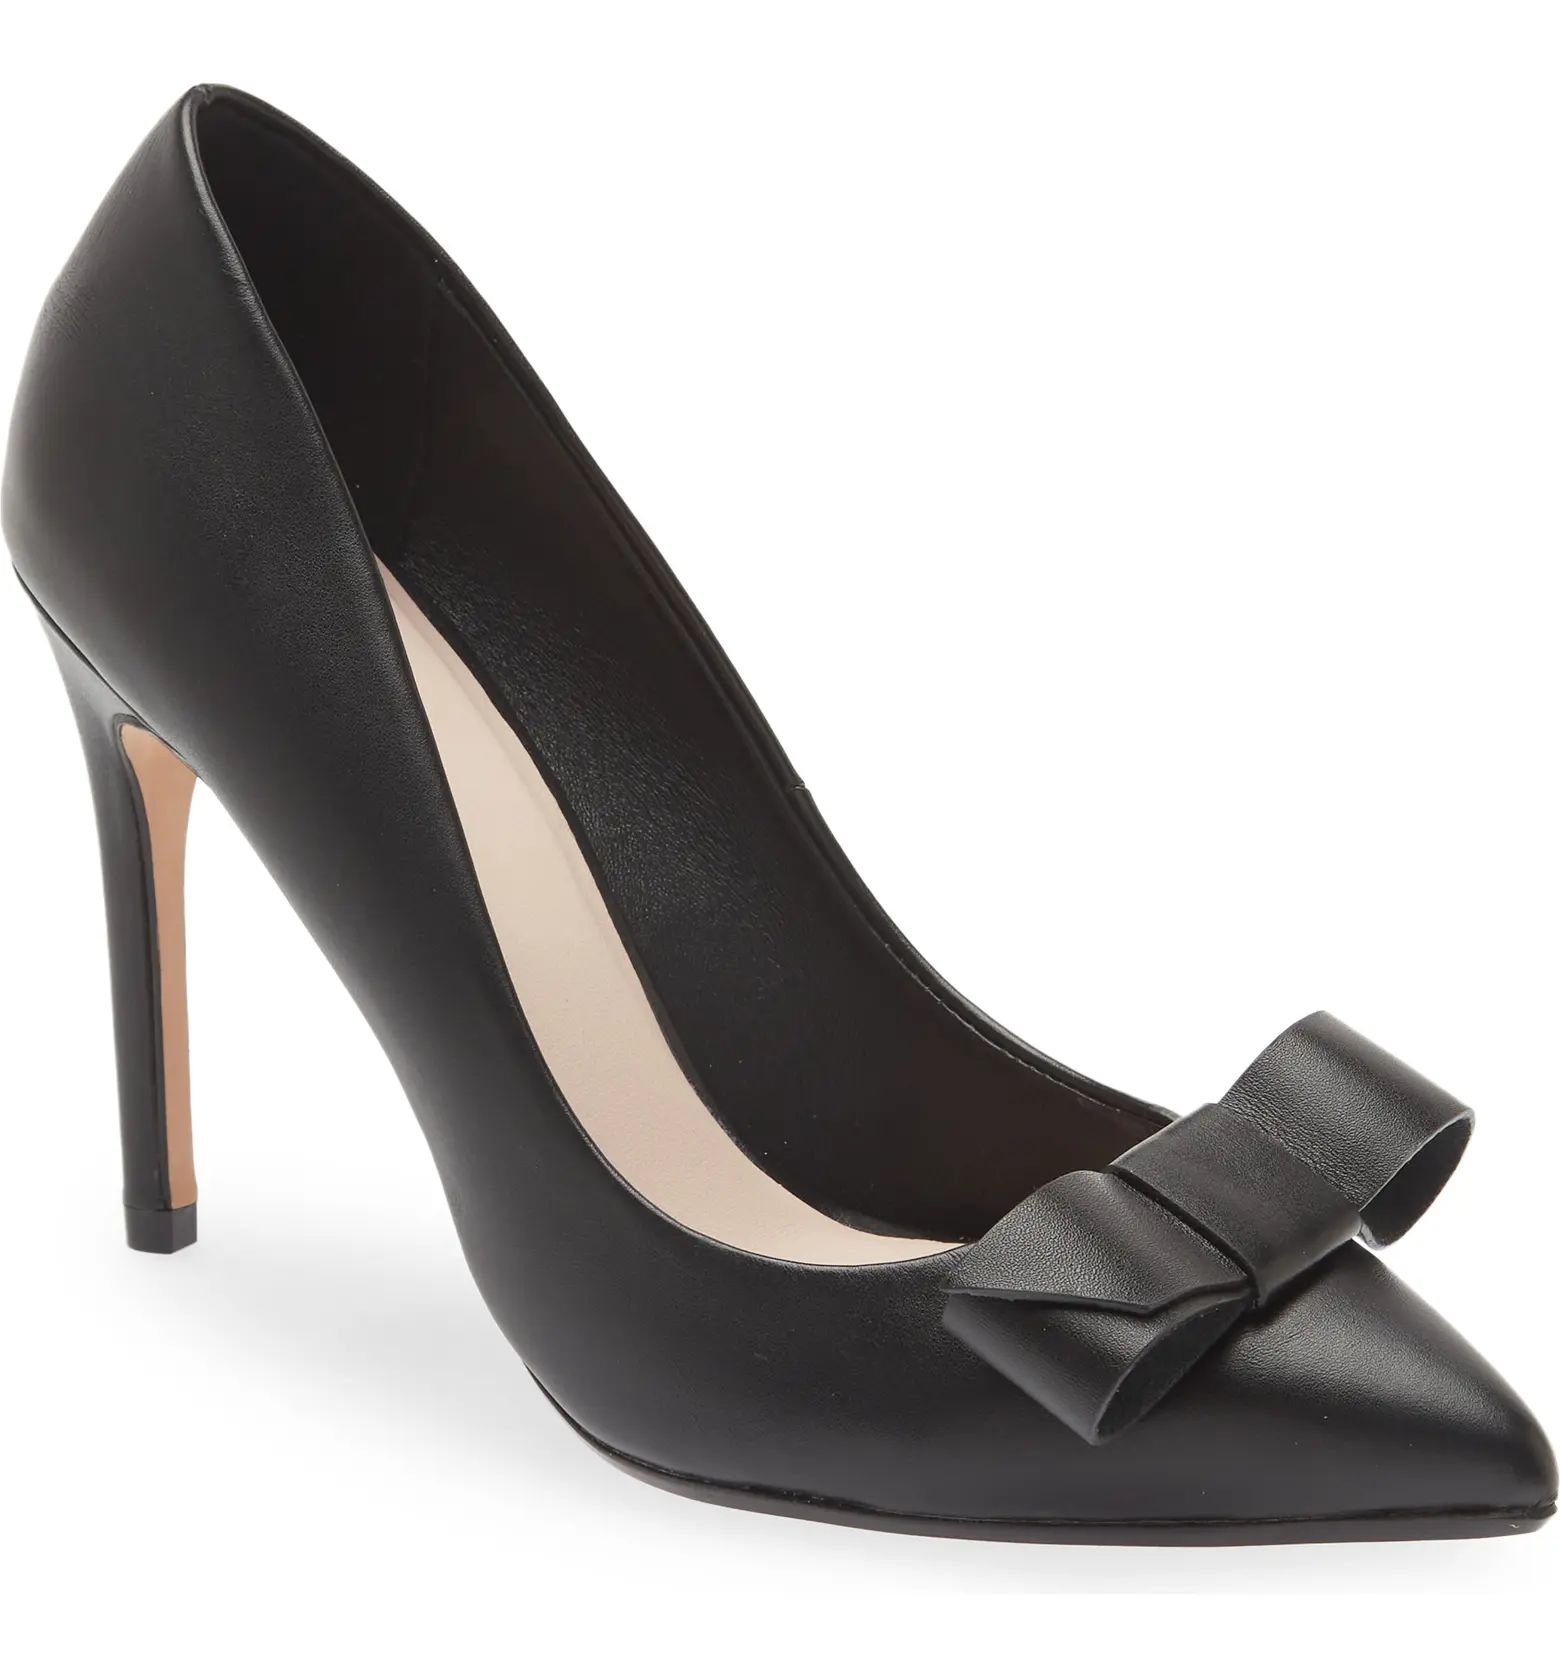 Zafinii Bow Pointed Toe Pump | Nordstrom